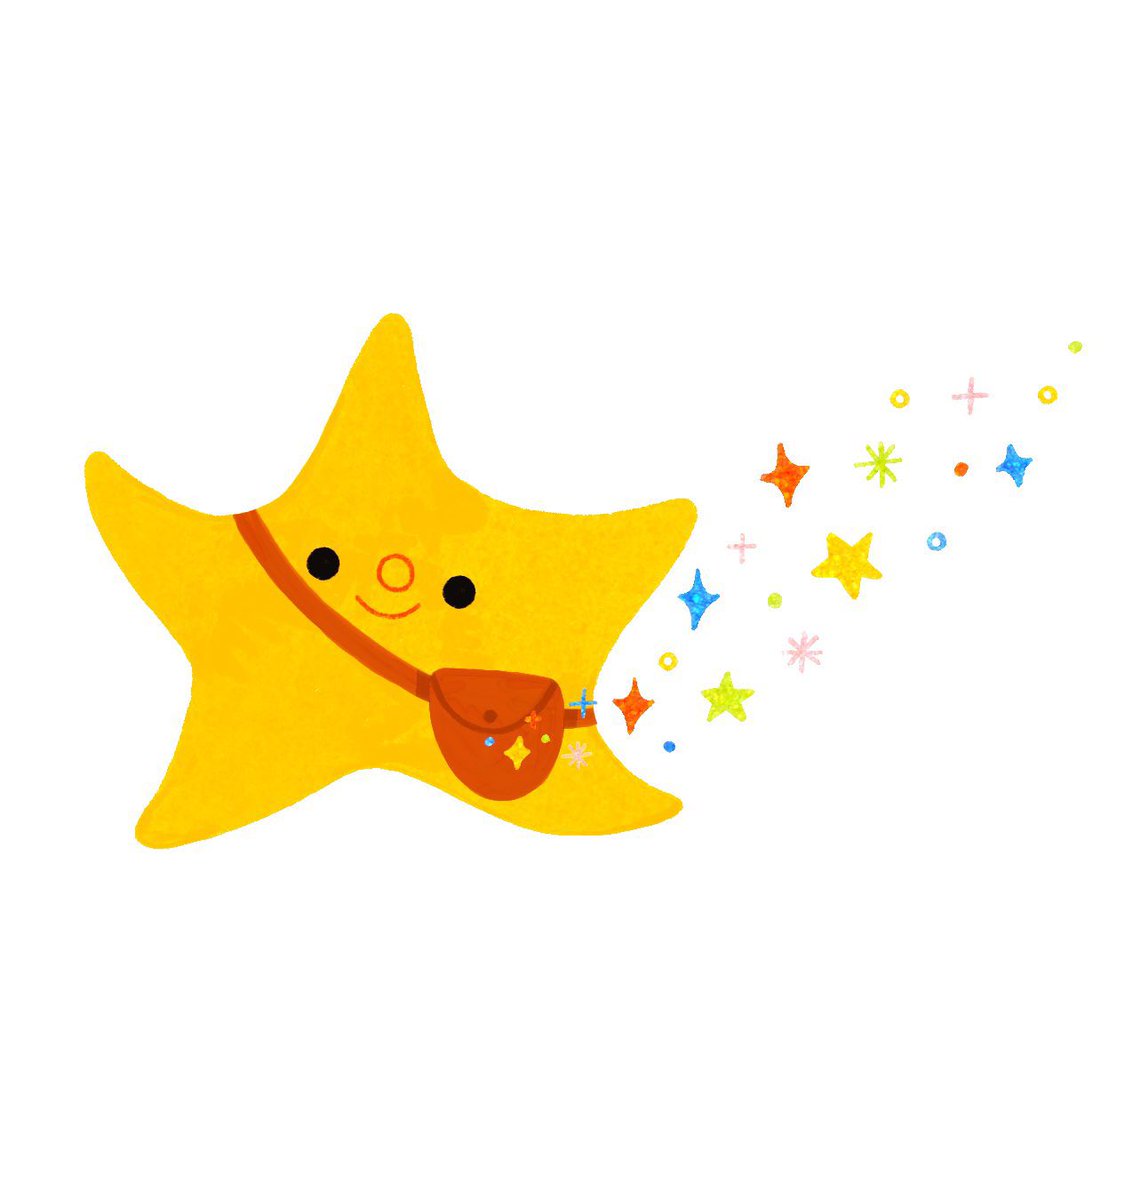 this is how i picture everyone on recoverytwt little stars on their journeys